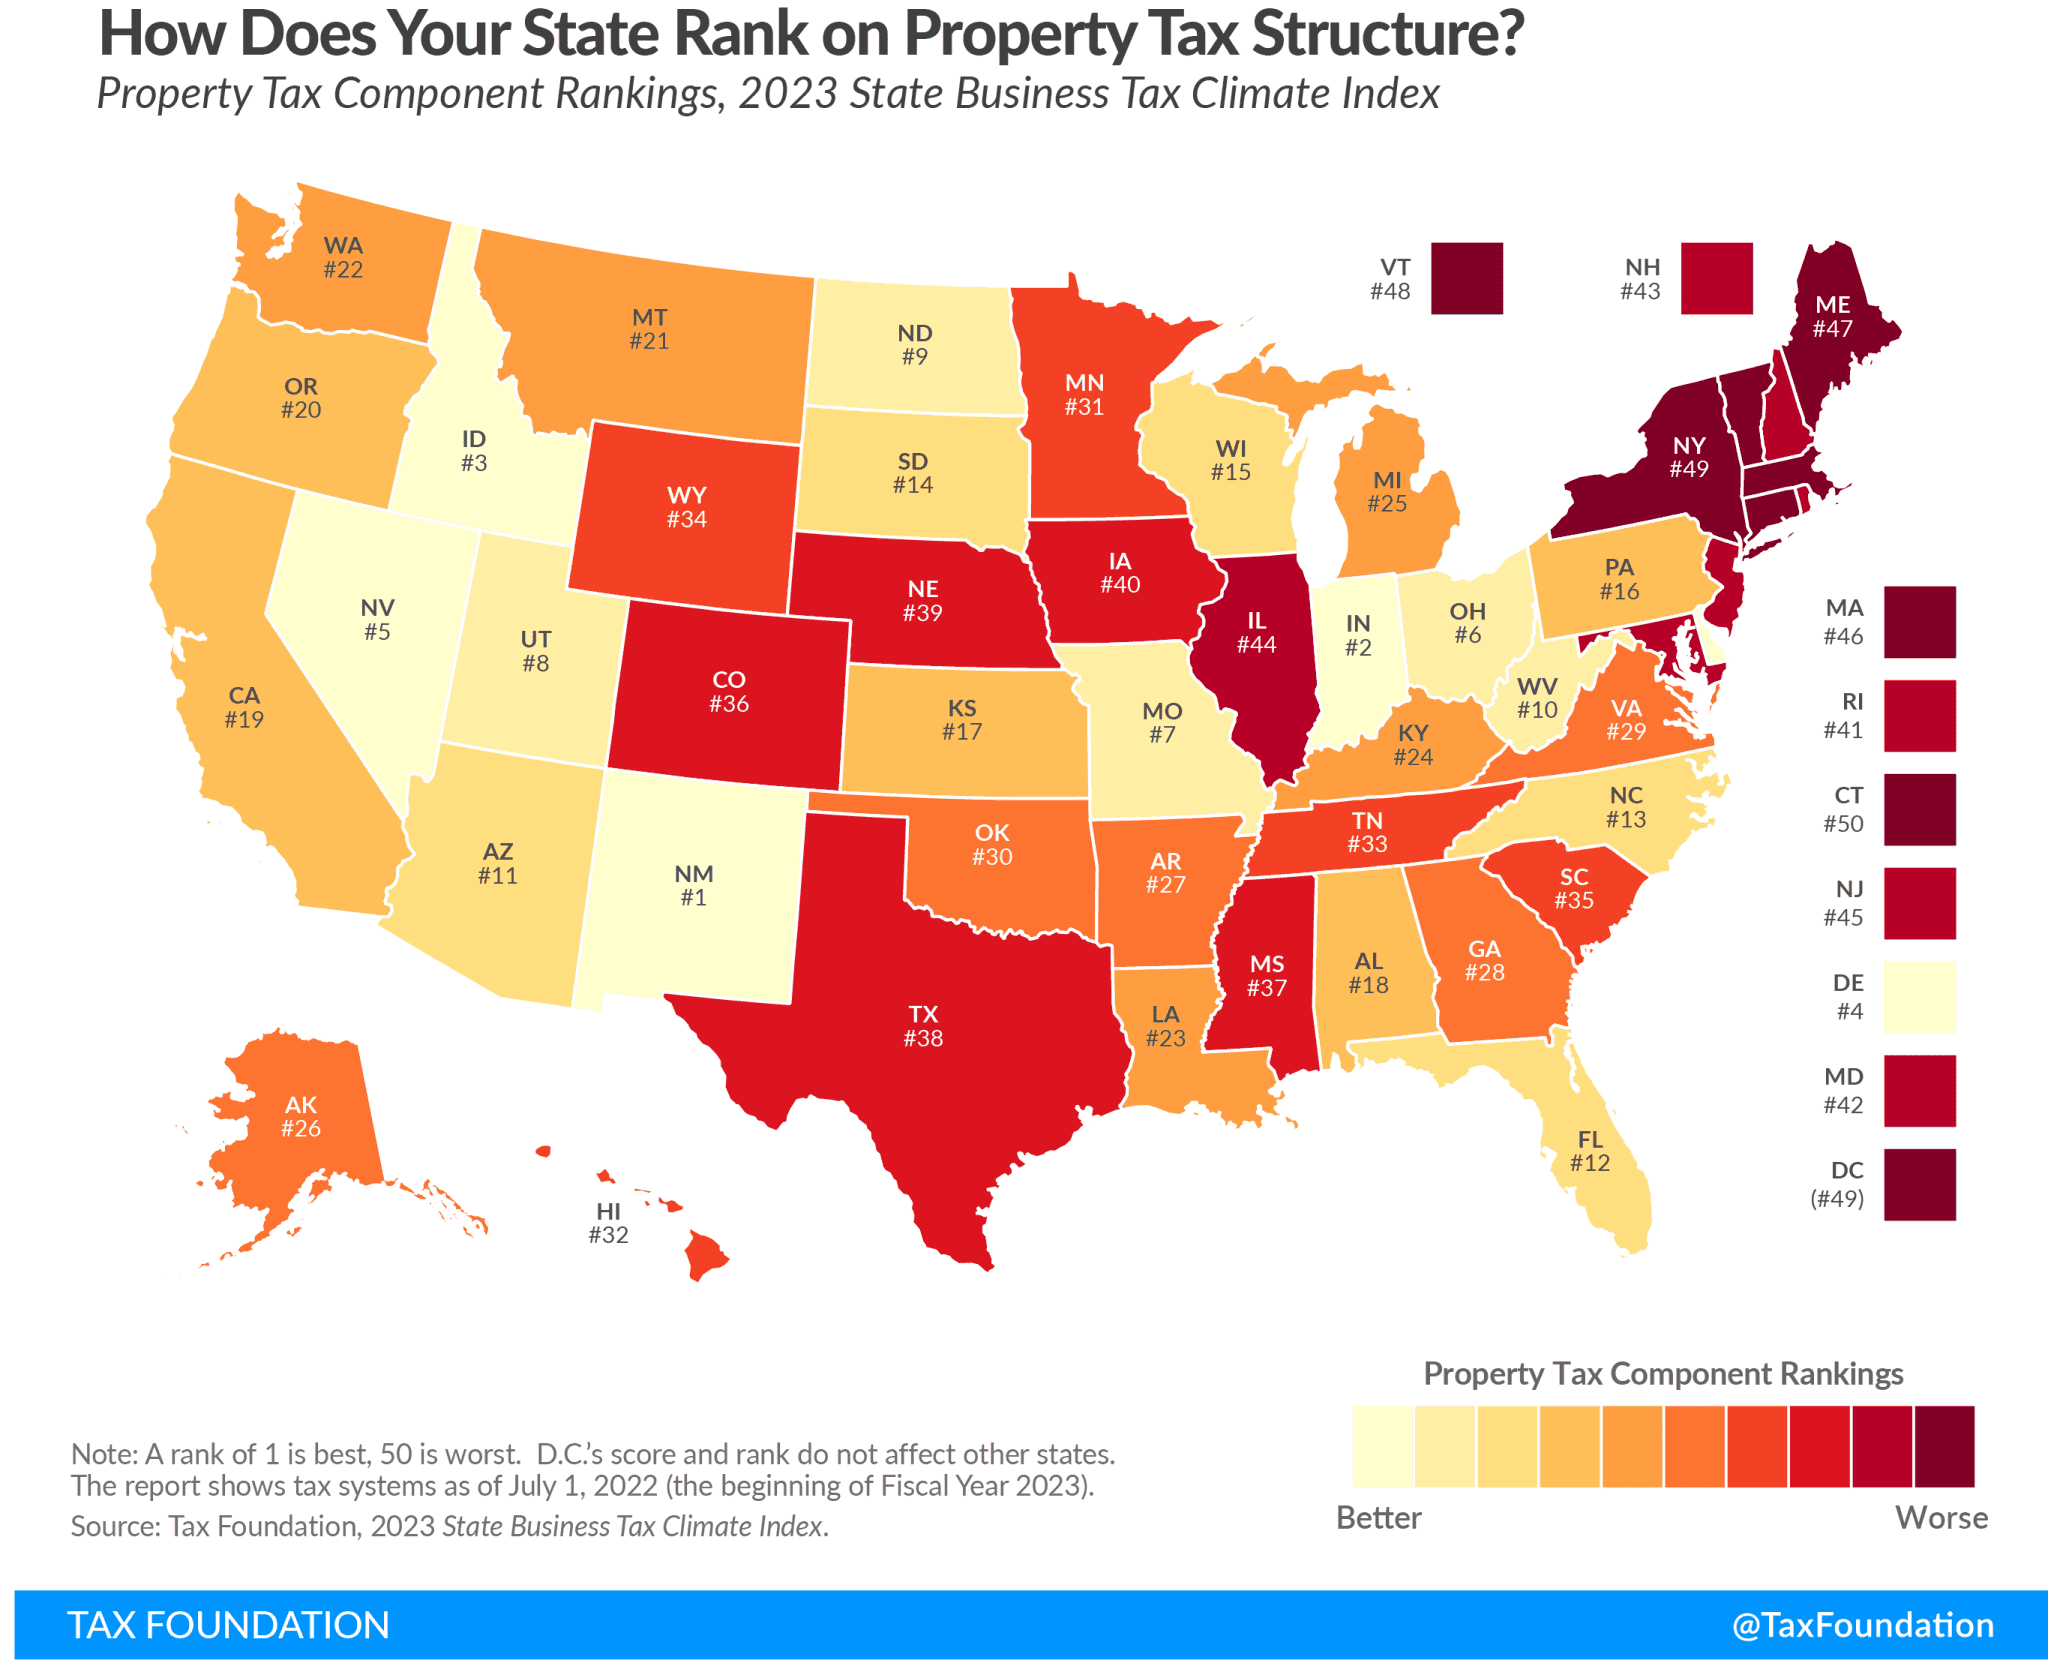 Ranking Property Taxes By State Property Tax Ranking Tax Foundation 